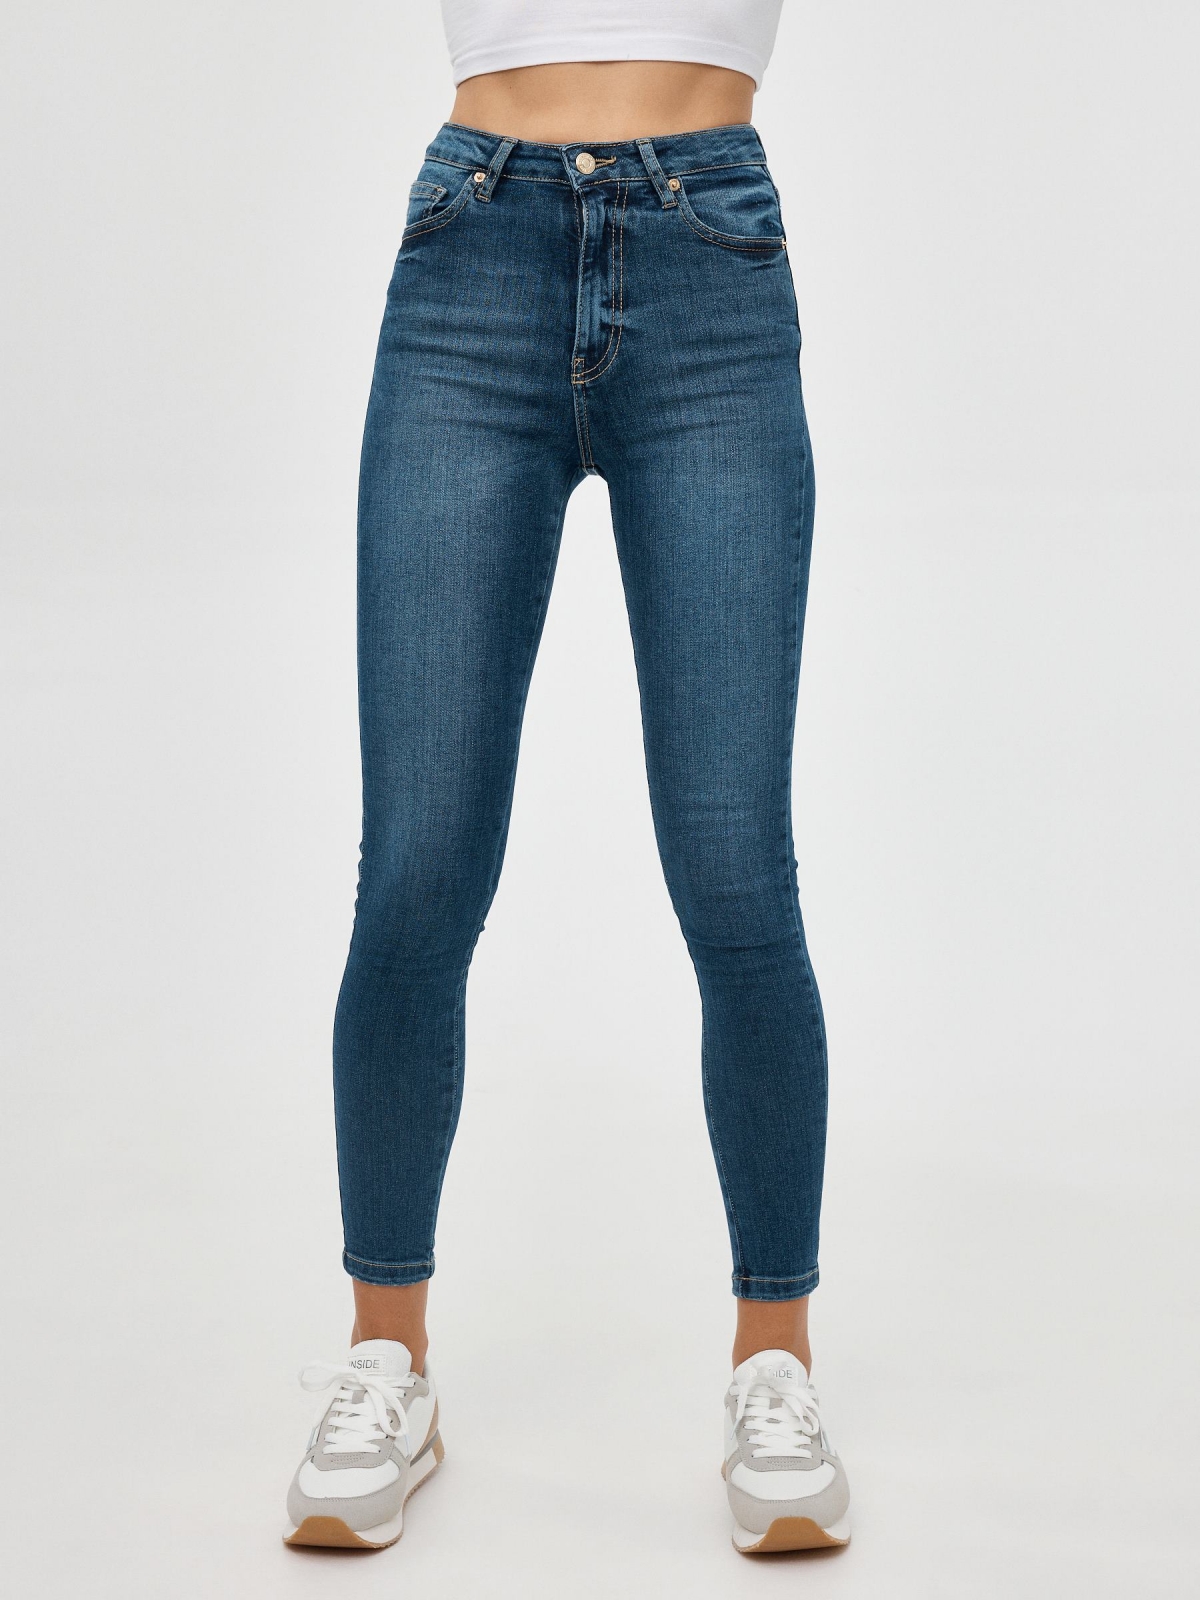 High rise skinny jeans blue middle front view